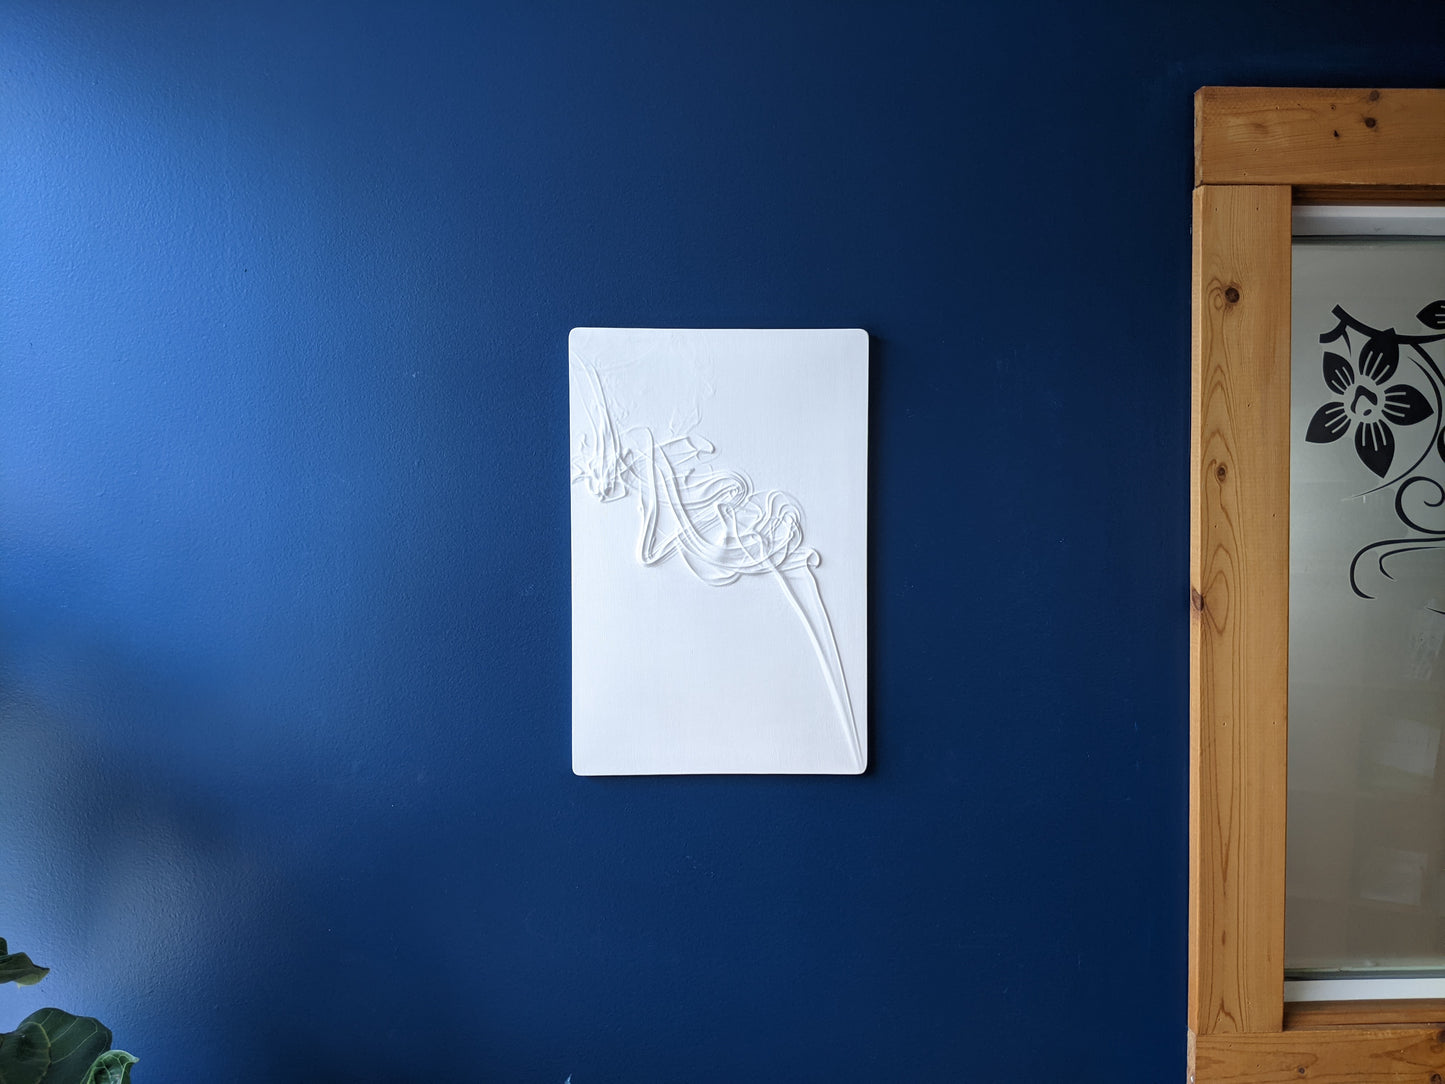 Incense - Swirling Smoke Bas Relief Sculpture